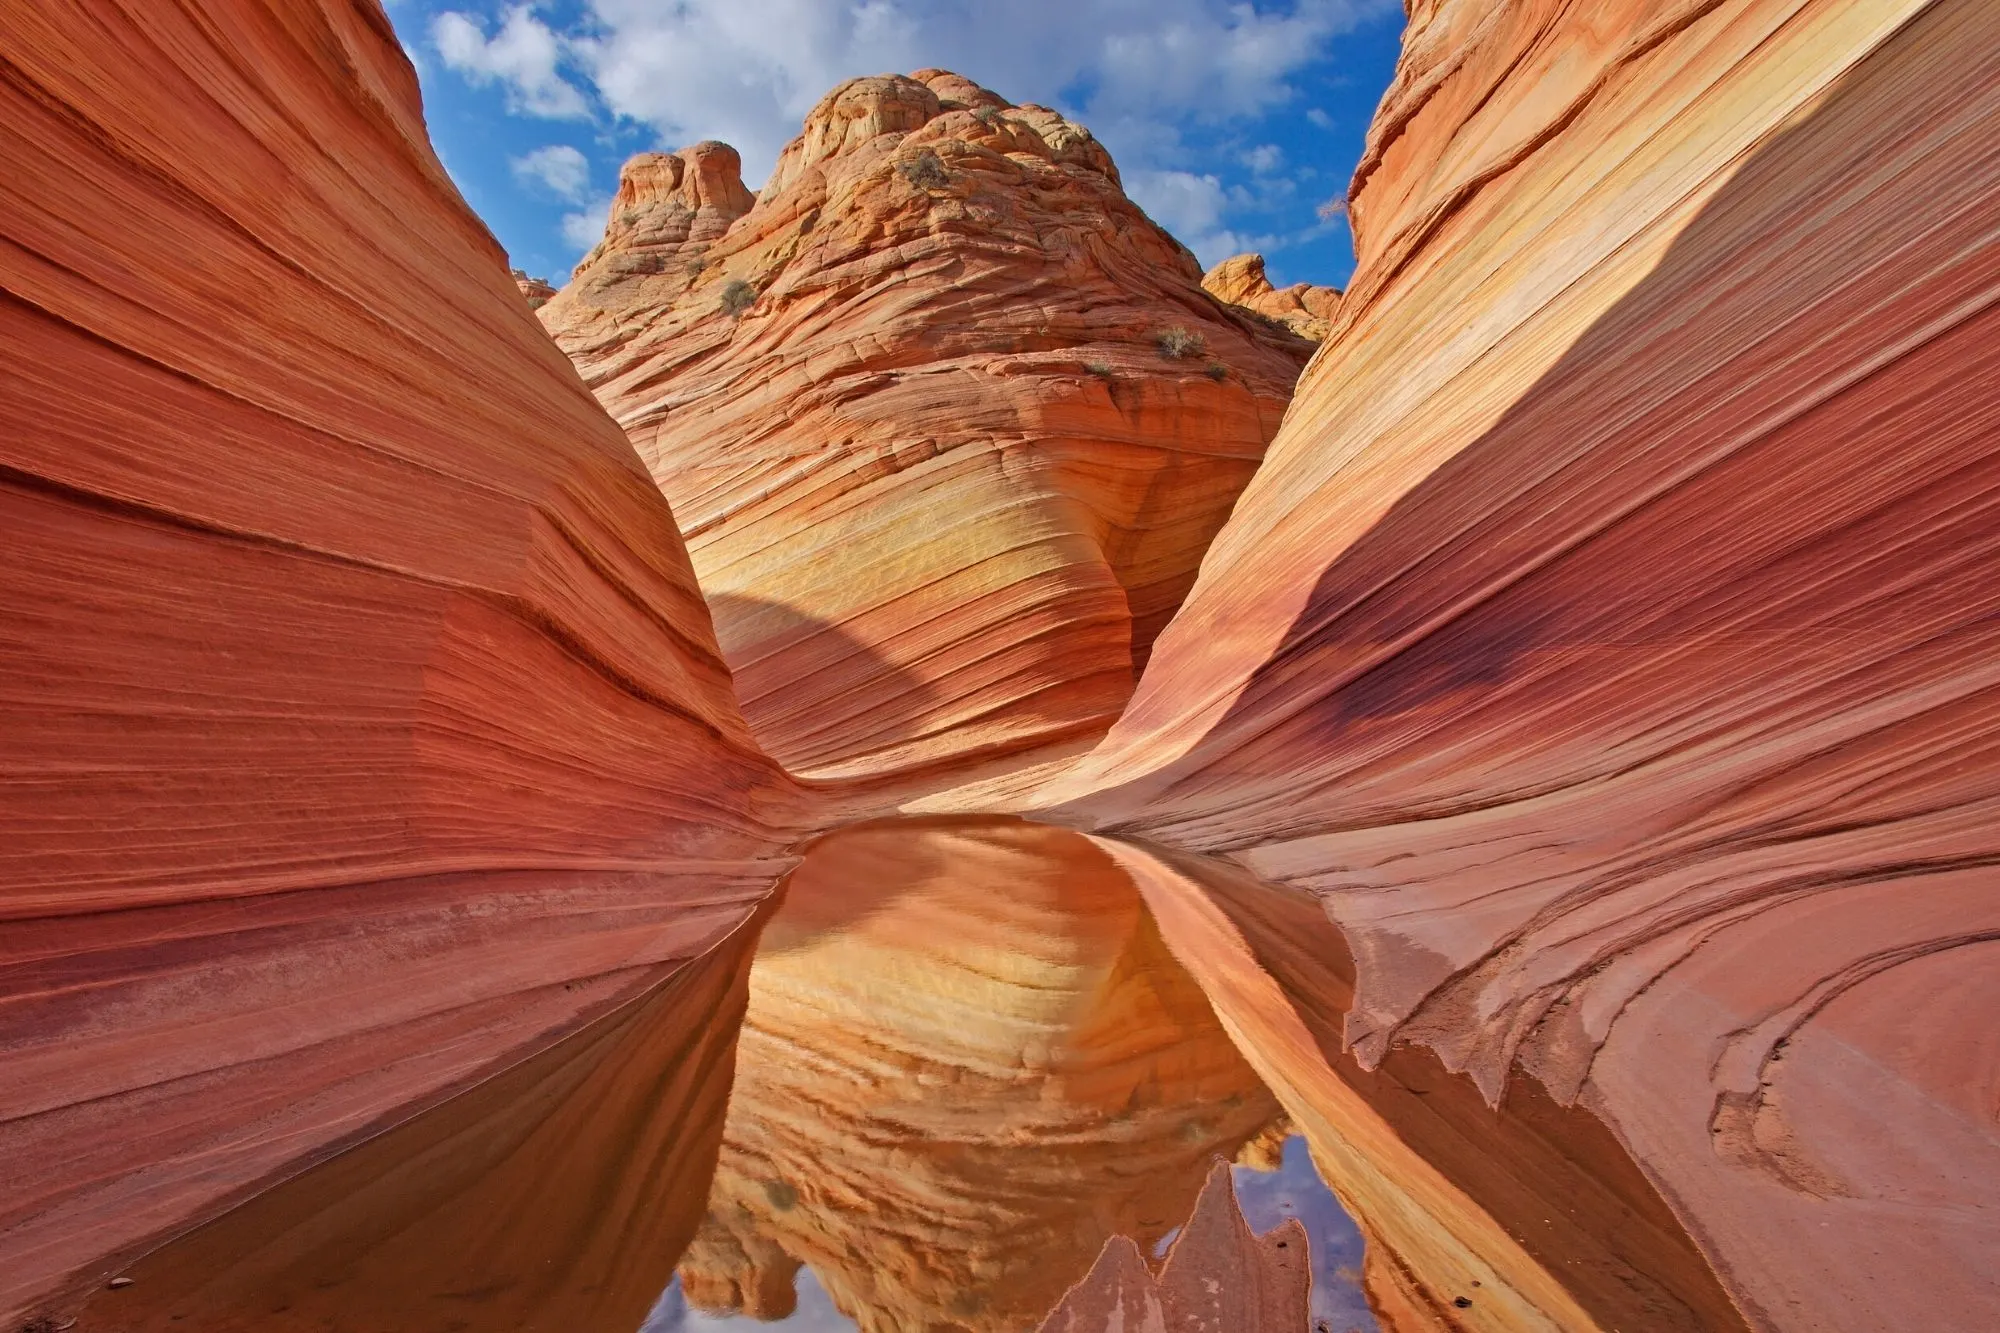 Reflections of sandstone rock formation in pool of water